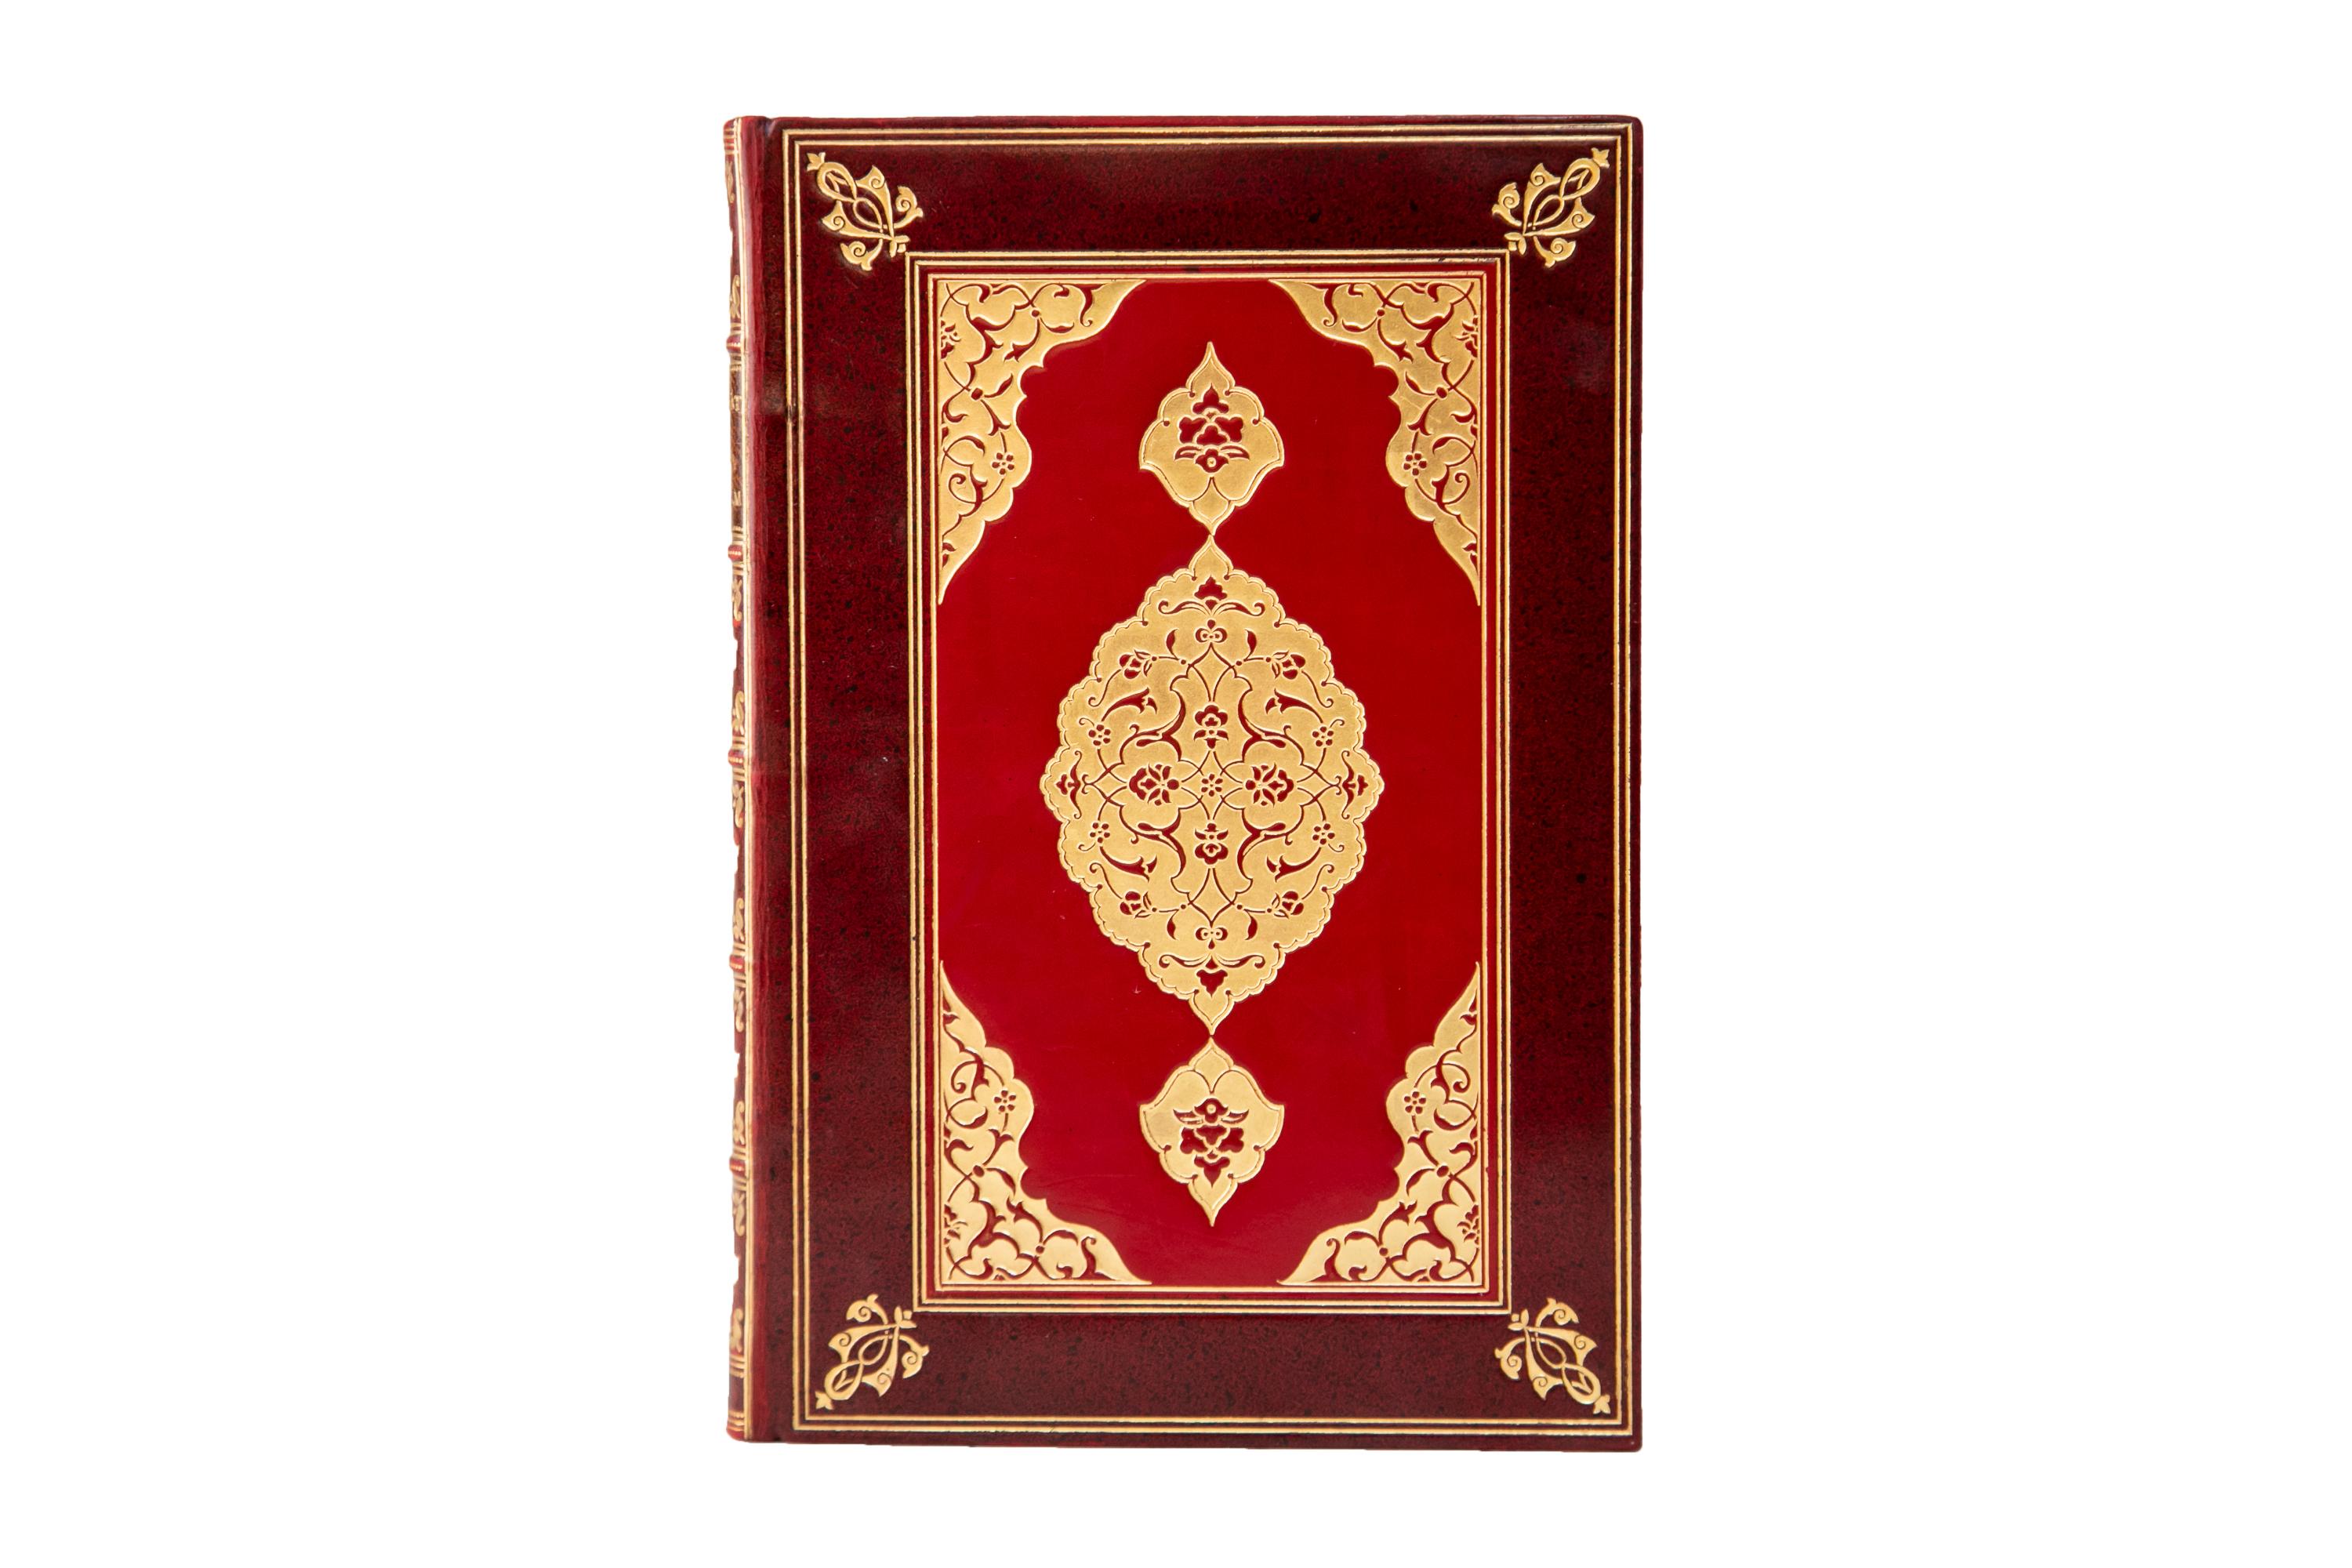 1 Volume. Edward Fitzgerald, The Rubáiyát of Omar Khayyám. Special Edition. Bound by Rivière & Sons in full red calf with the covers displaying bordering, ornate, and detailed floral detailing centrally and in the corners, and speckled red calf